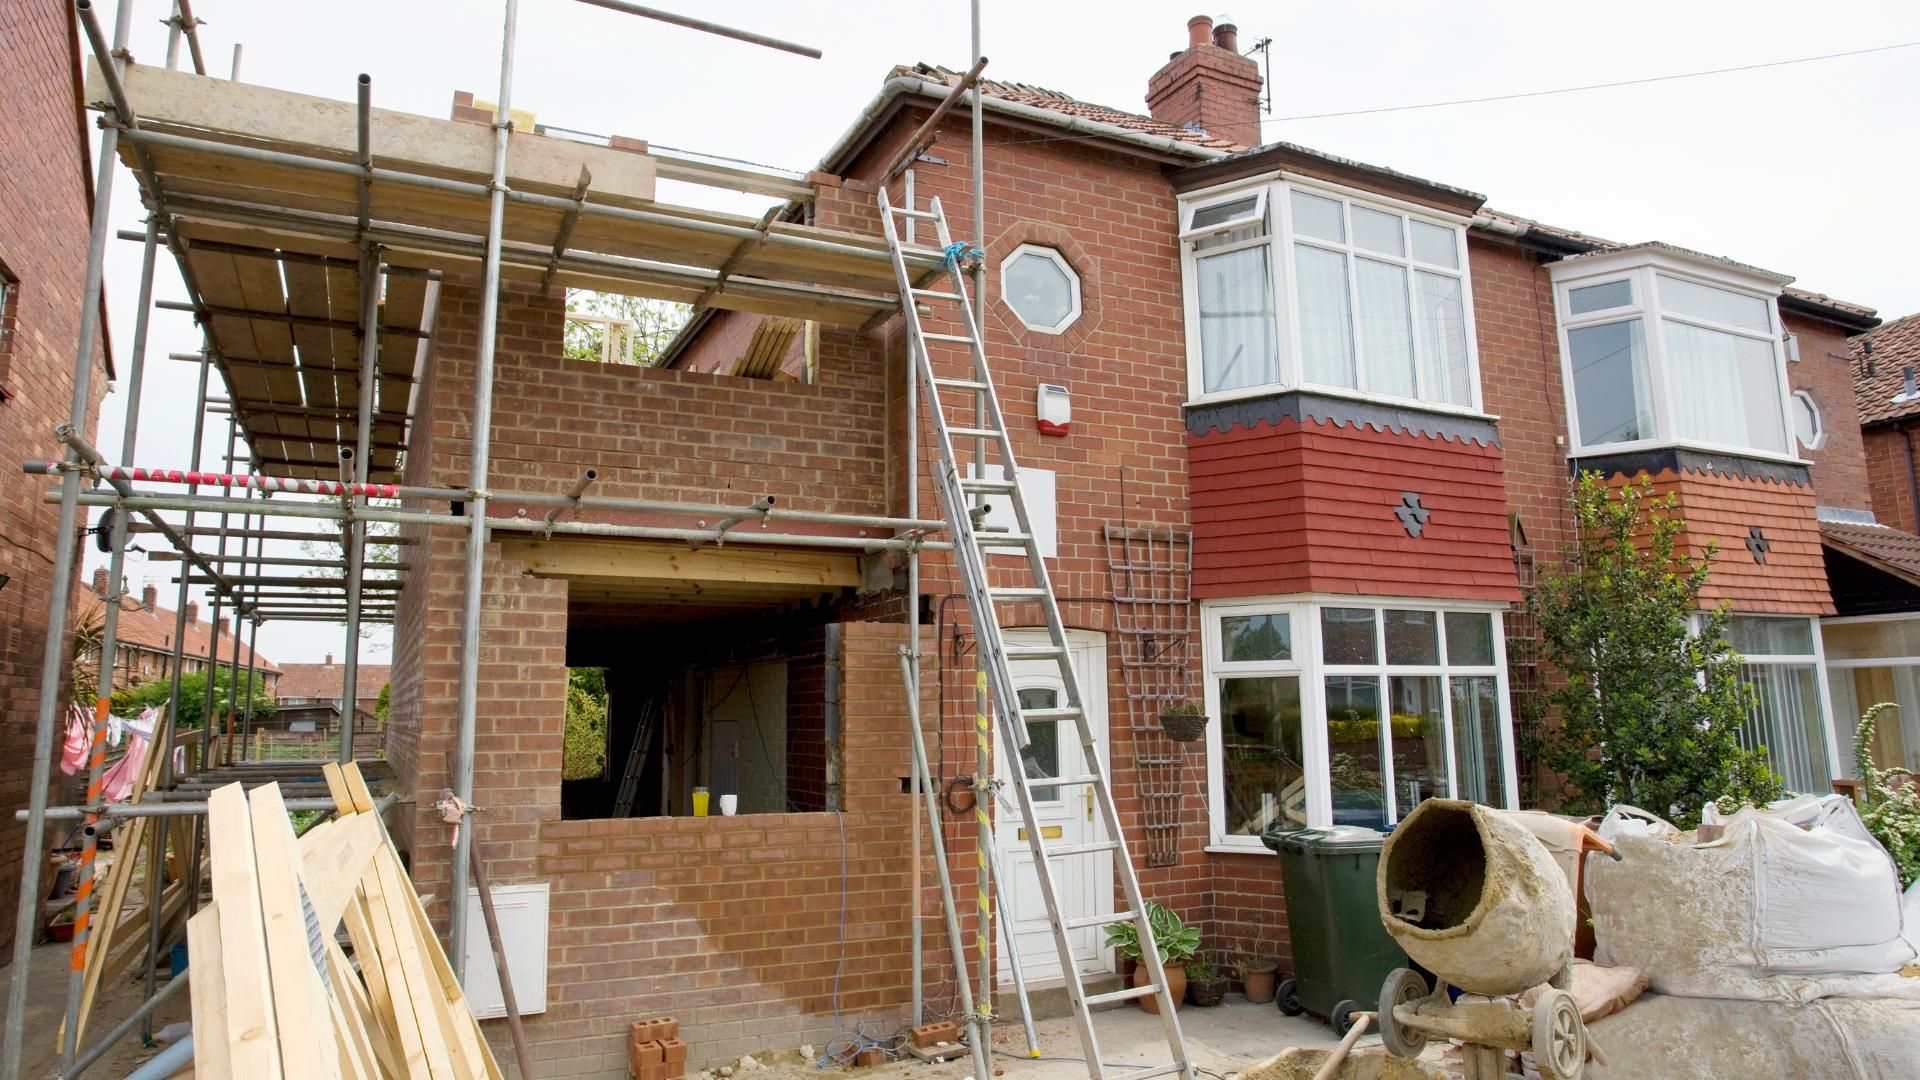 Selling with planning permission: your questions answered